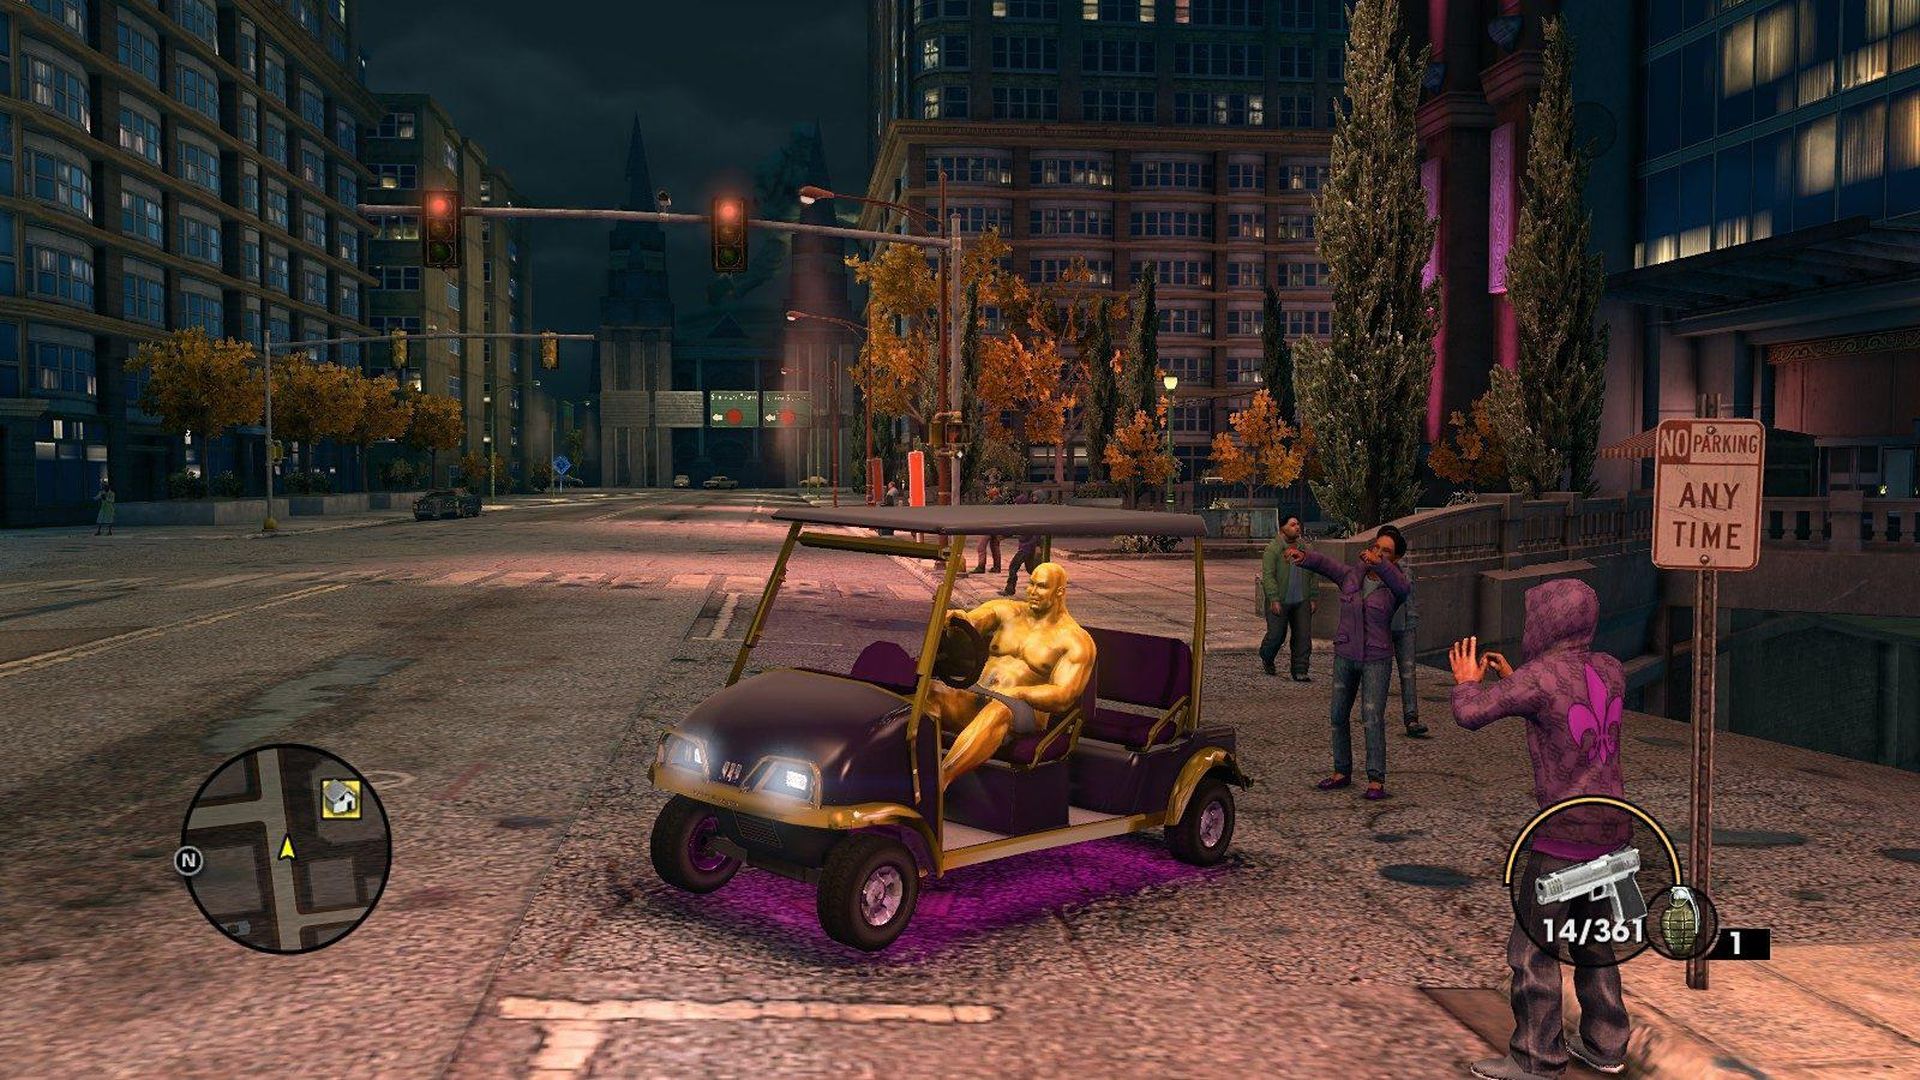 Saints Row: The Third The Full Package [STEAM]✔️PAYPAL